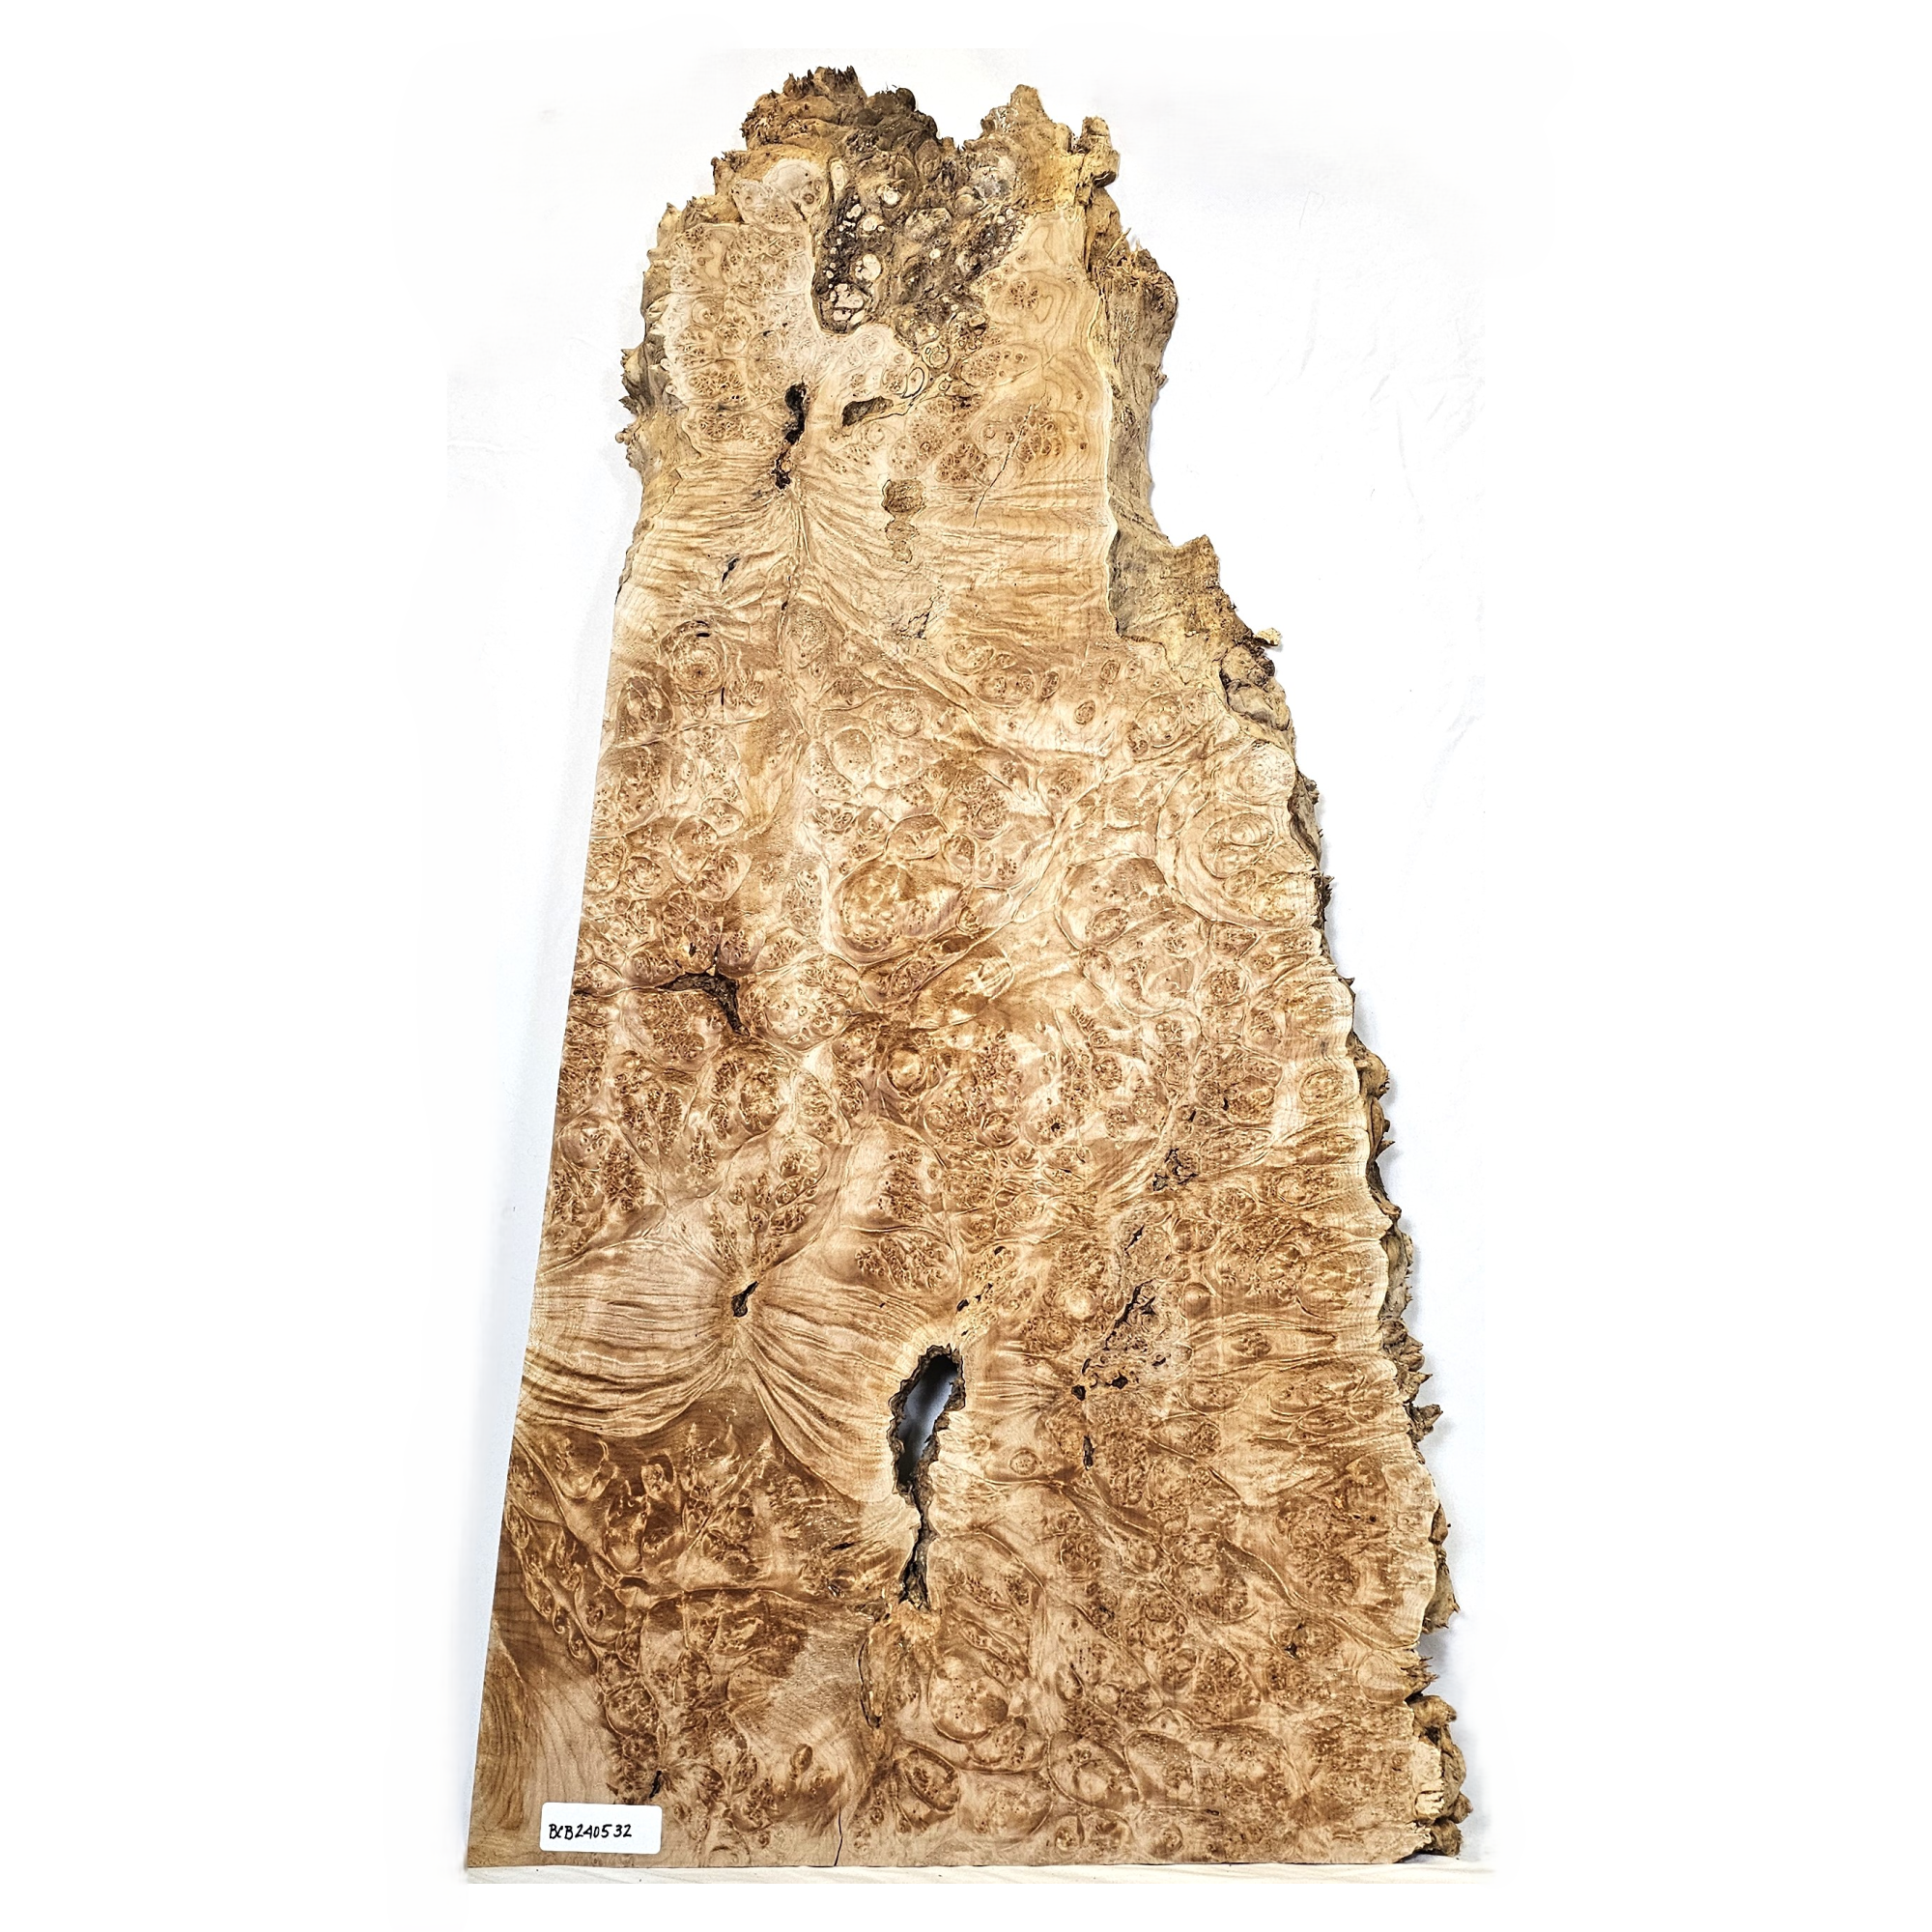 Stunning maple burl board/slab with hundreds of burl eyes, bark seams, wonderful color and spiky live edge.